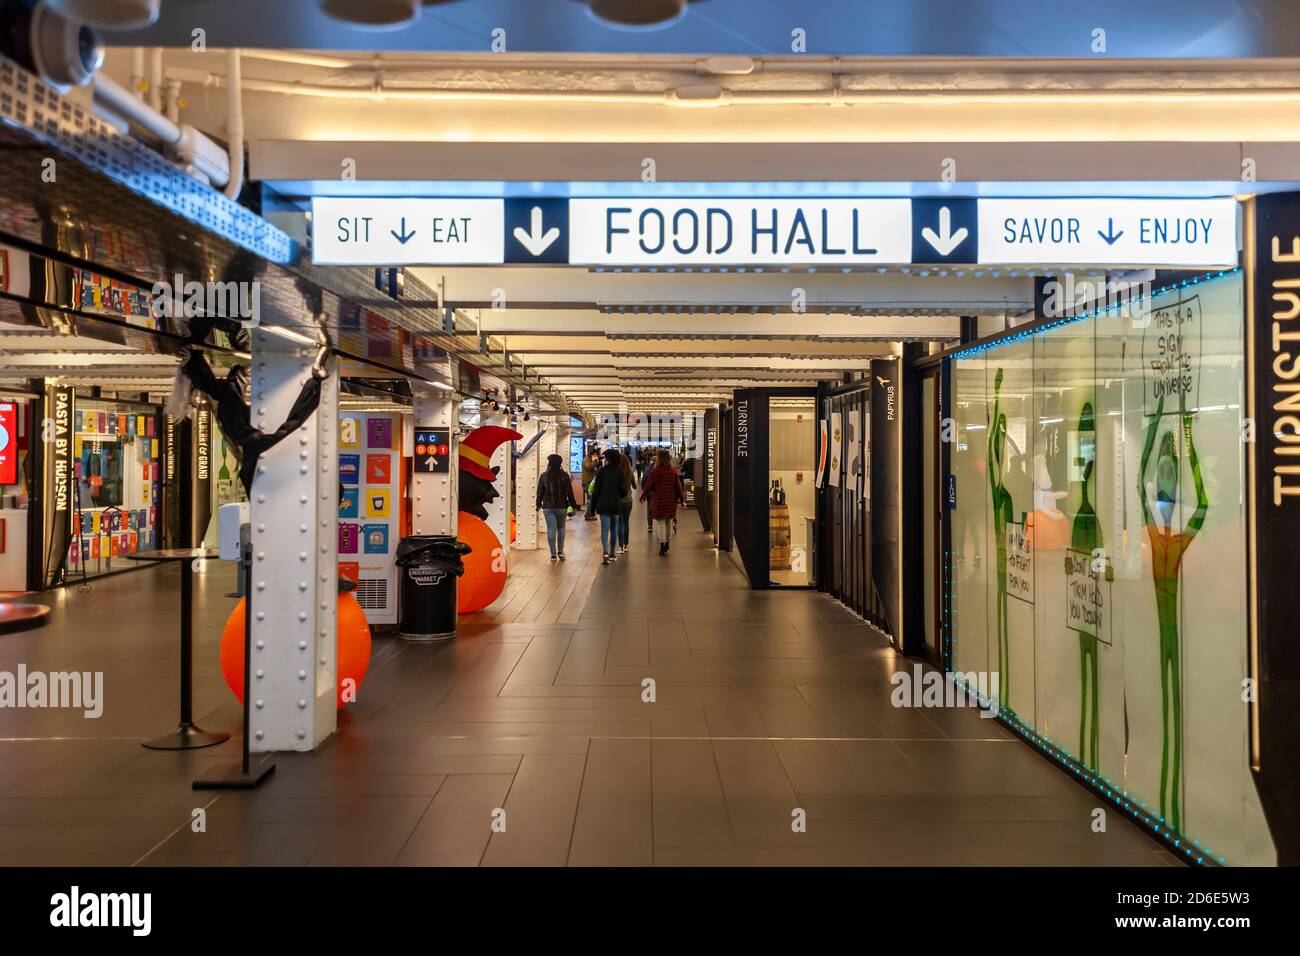 The Turnstyle food hall and retail mall located in a formerly disused subway corridor in New York’s Columbus Circle station reopens after being closed for 6 months due to the pandemic, on Wednesday, October 14, 2020. The 30,000 square foot space has 39 shops and kiosks, both retail and food vendors, with most predominately mom and pop  local businesses. (© Richard B. Levine) Stock Photo